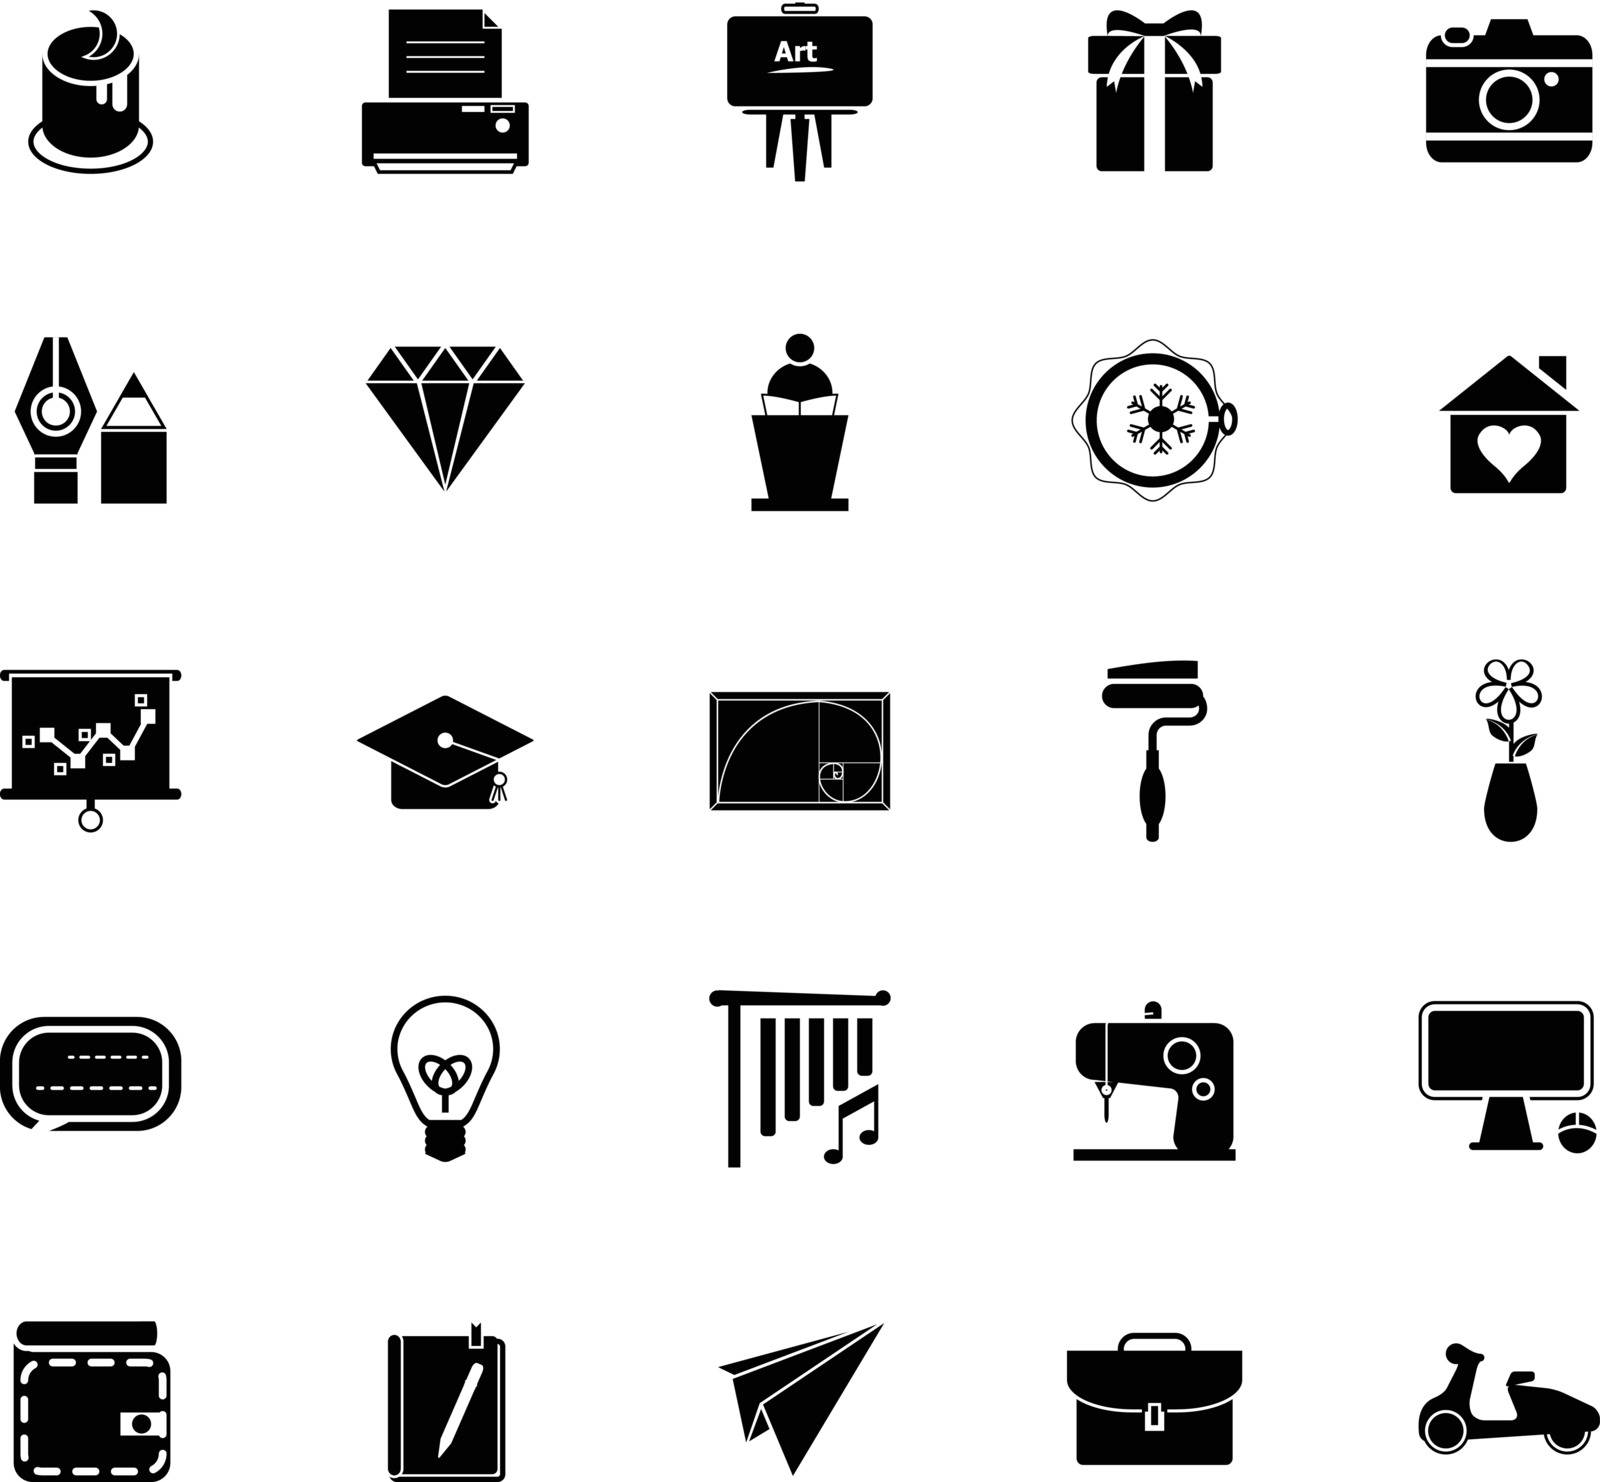 Art and creation icons on white background by nalinratphi